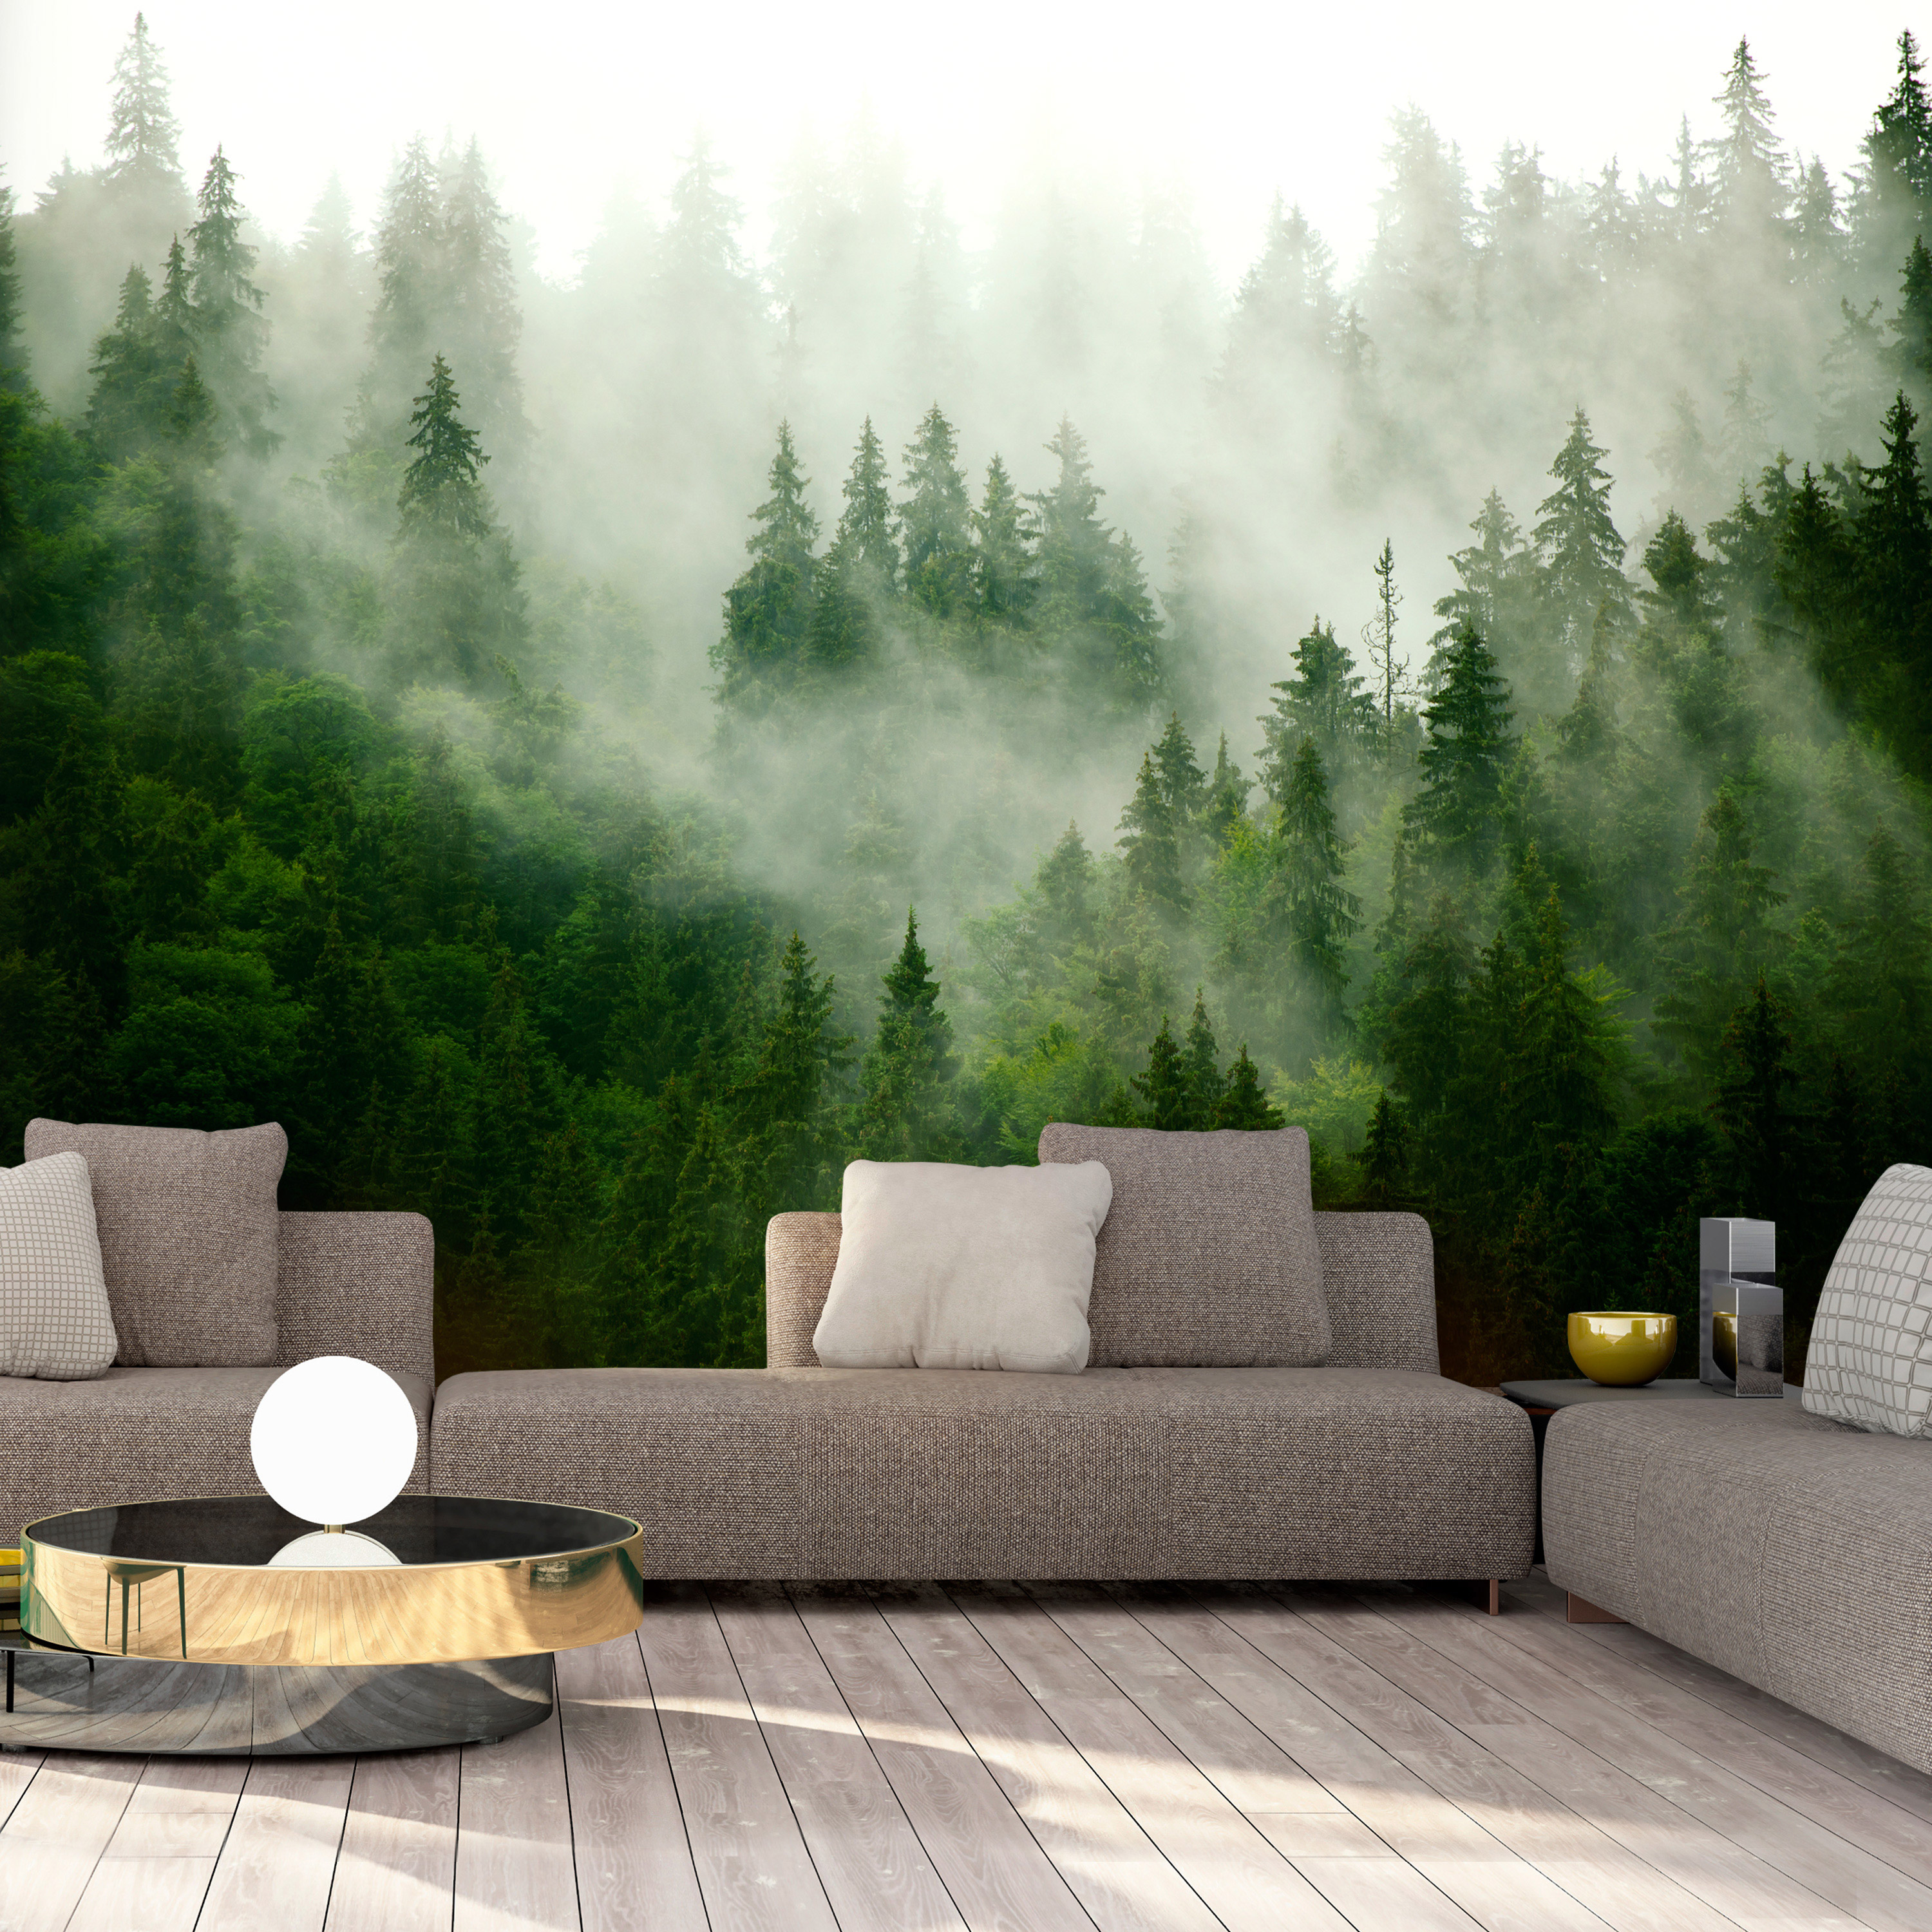 Self-adhesive Wallpaper - Mountain Forest (Green) - 245x175